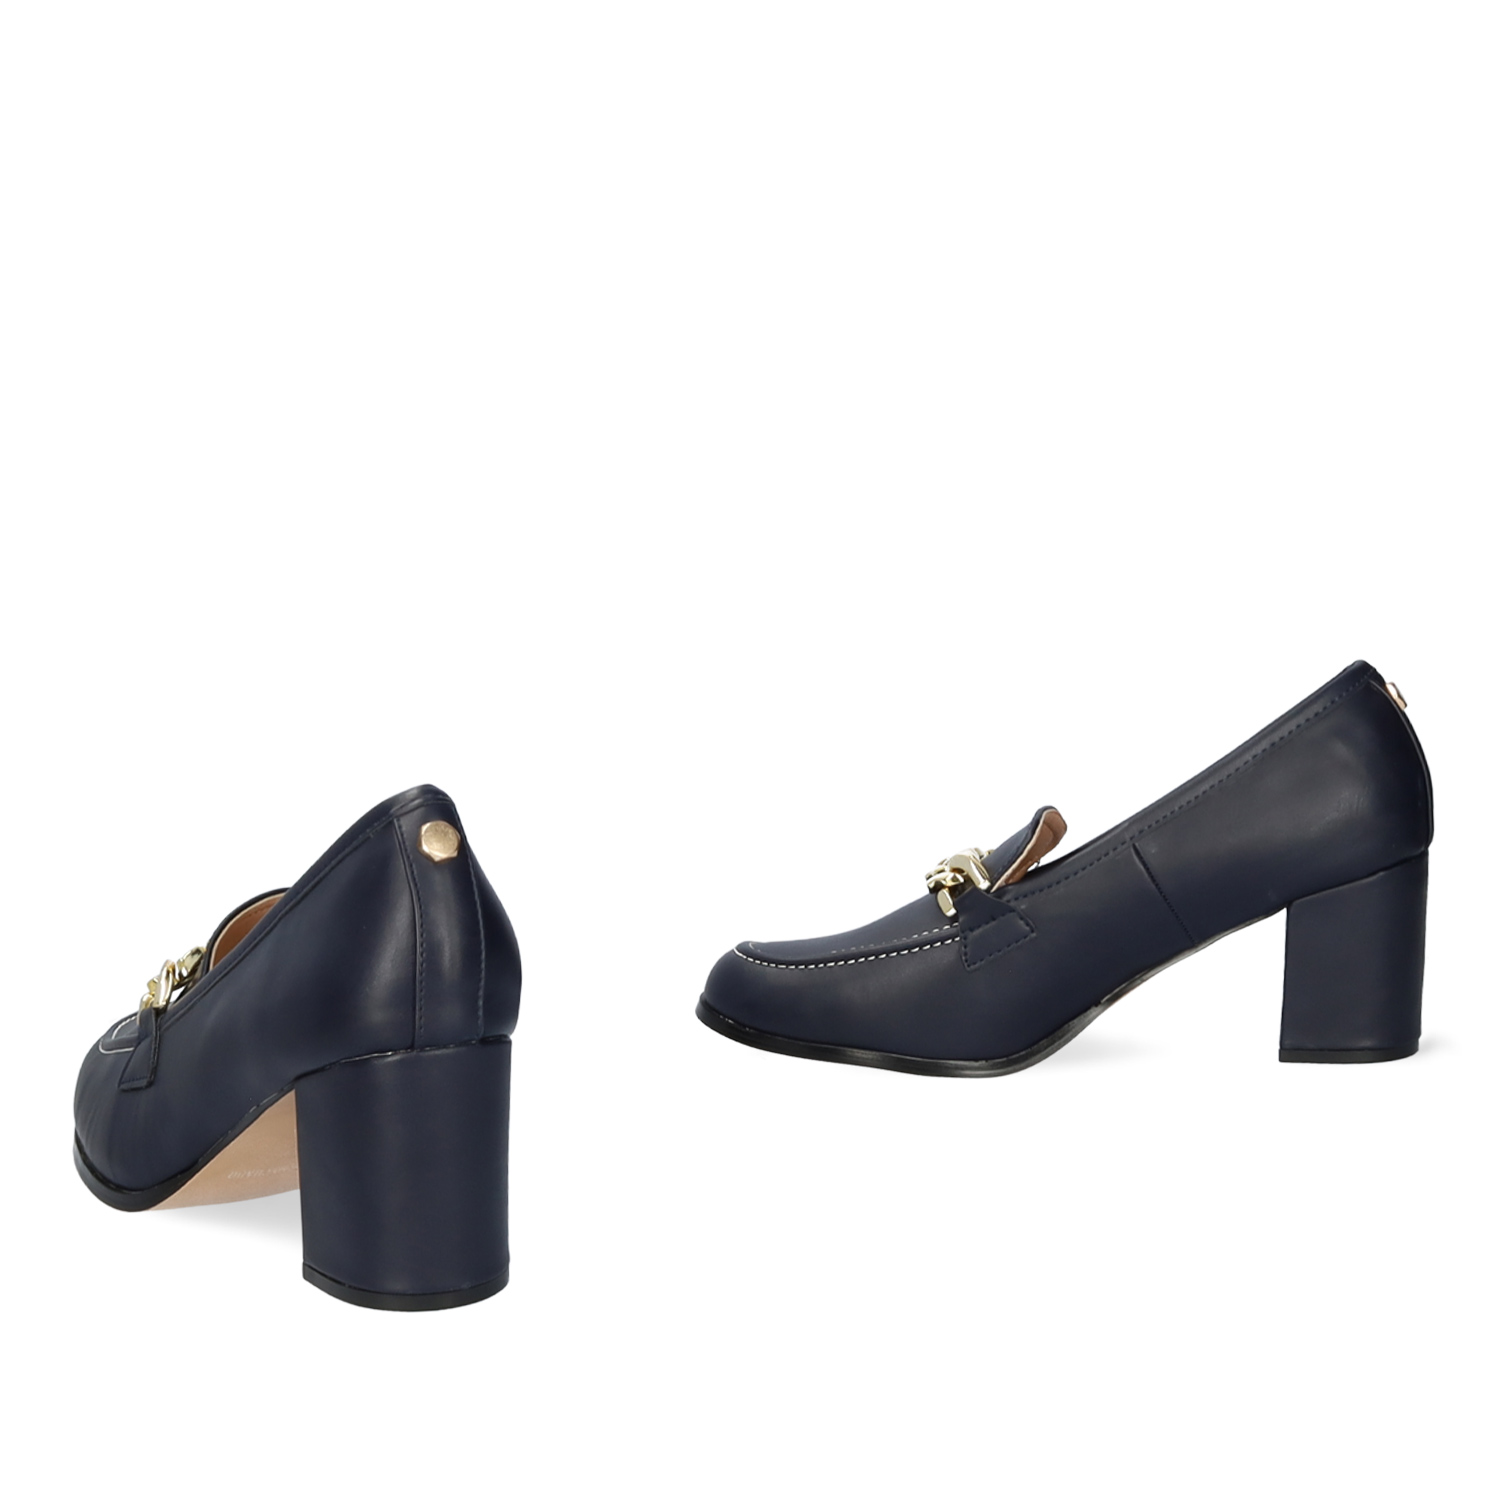 Heeled moccasins in navy faux leather and gold chain link detail 